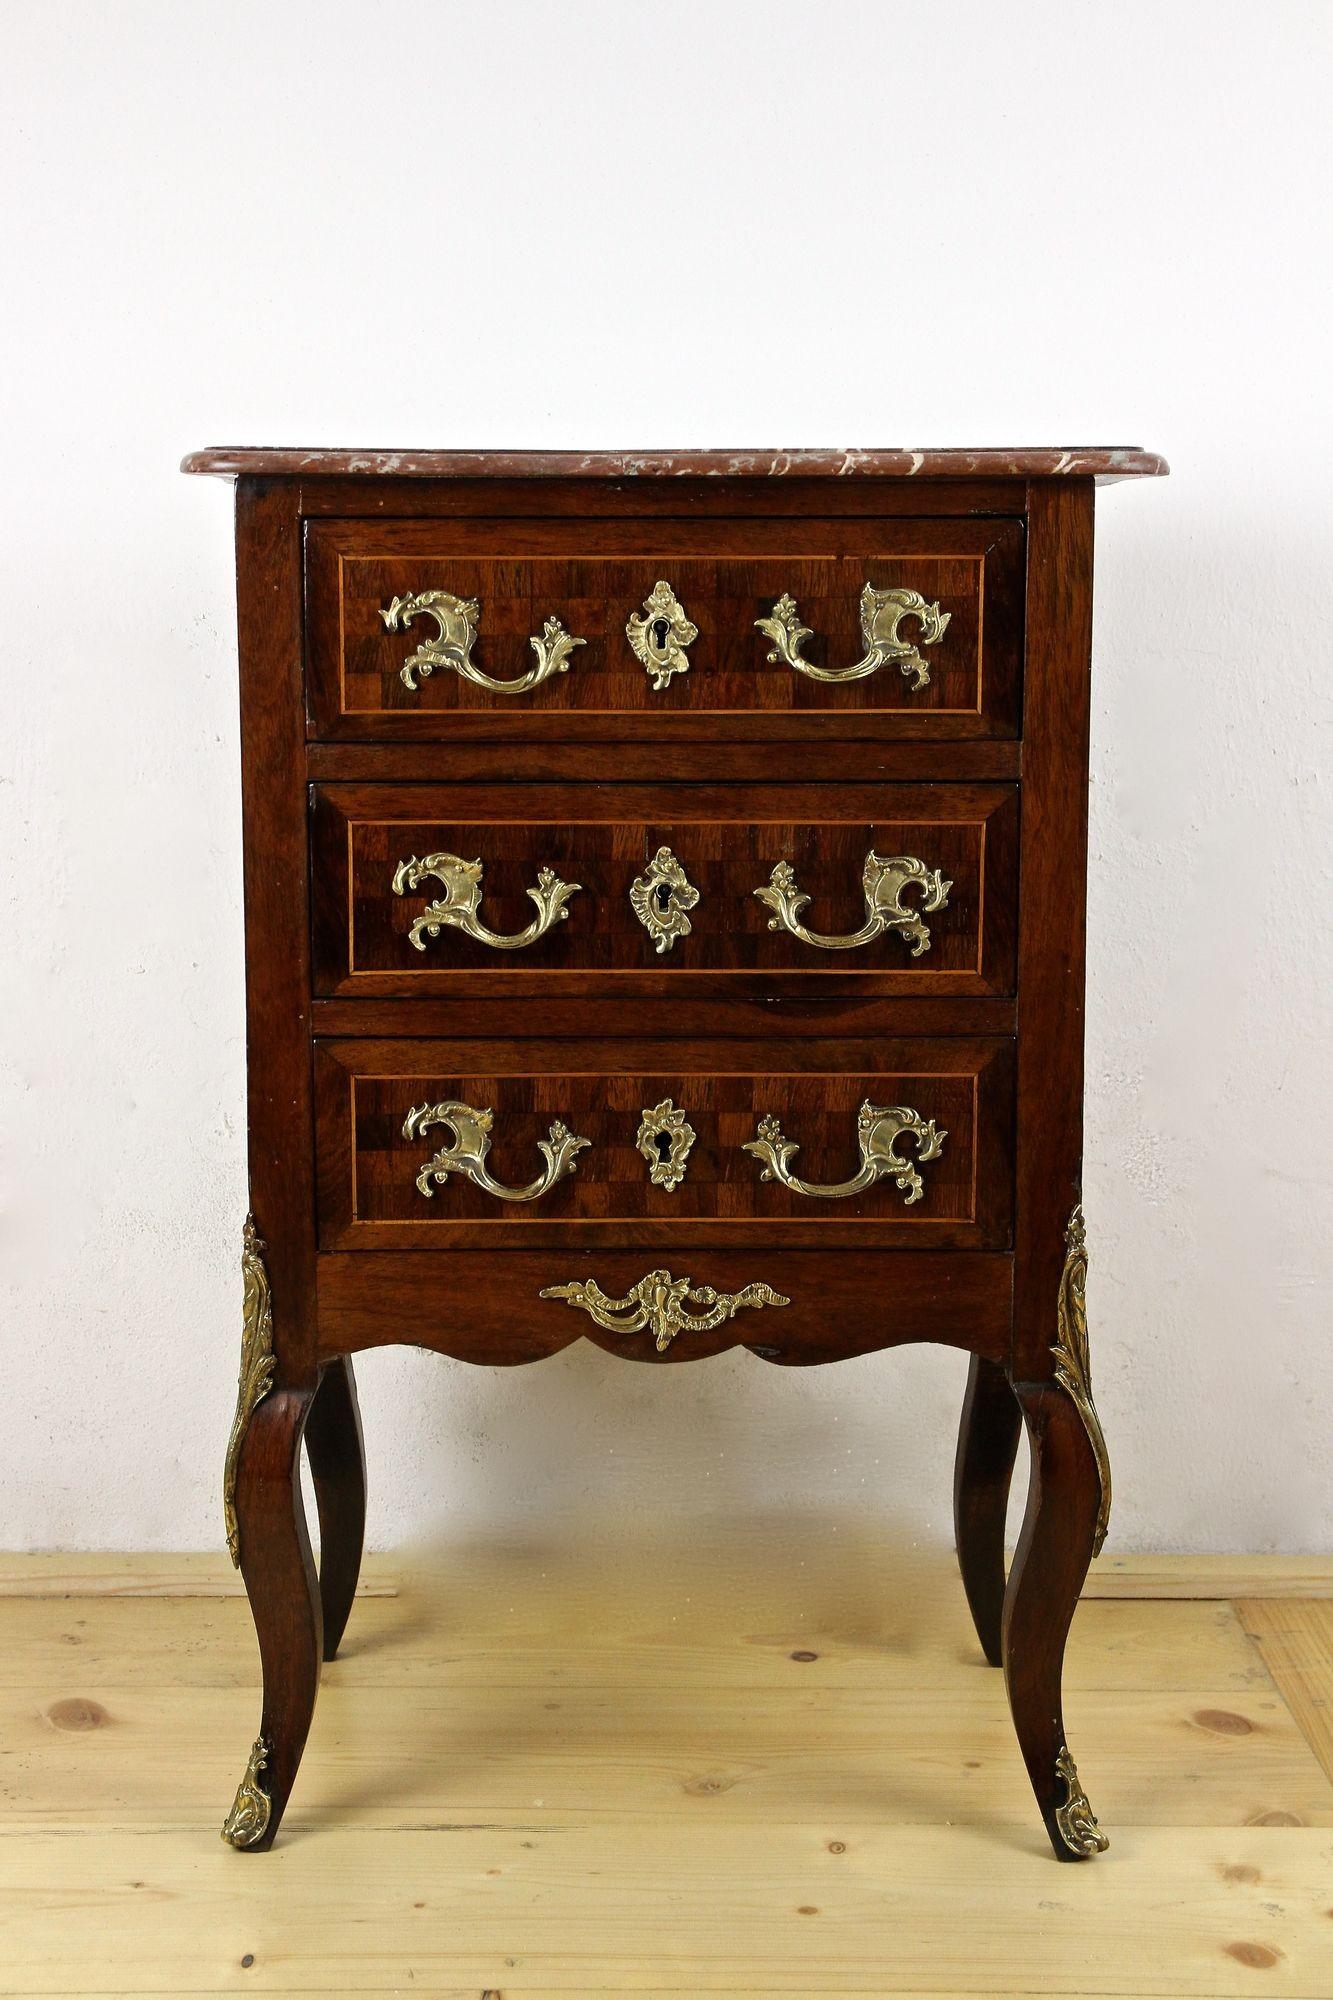 Lovely petite mahogany chest of drawers from the Baroque revival period in France around 1880. A unique designed, great sized chest made of spruce and artfully veneered with fine mahogany wood. This dresser from the late 19th century - the so-called